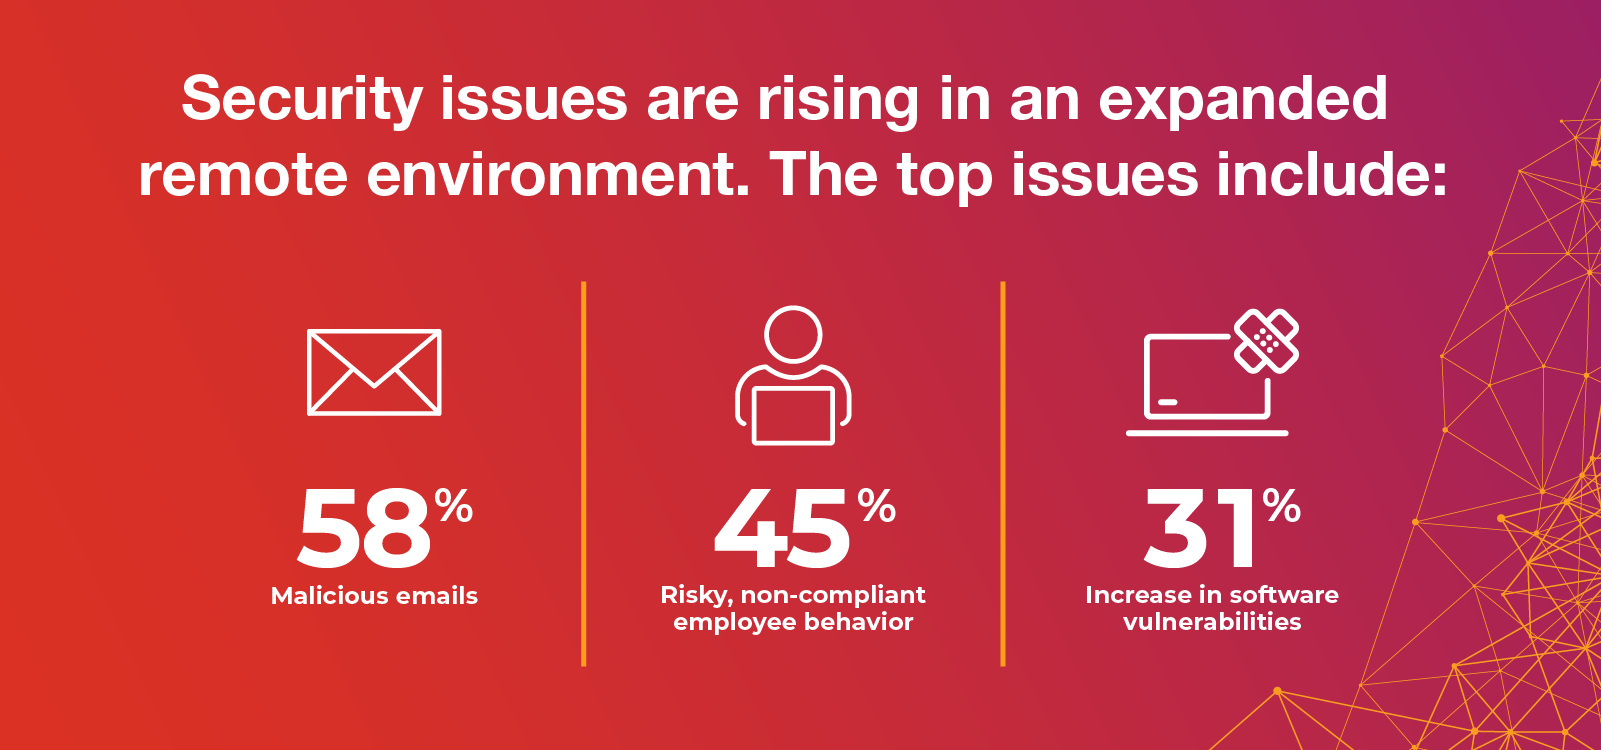 Security issues are rising in an expanded remote environment.